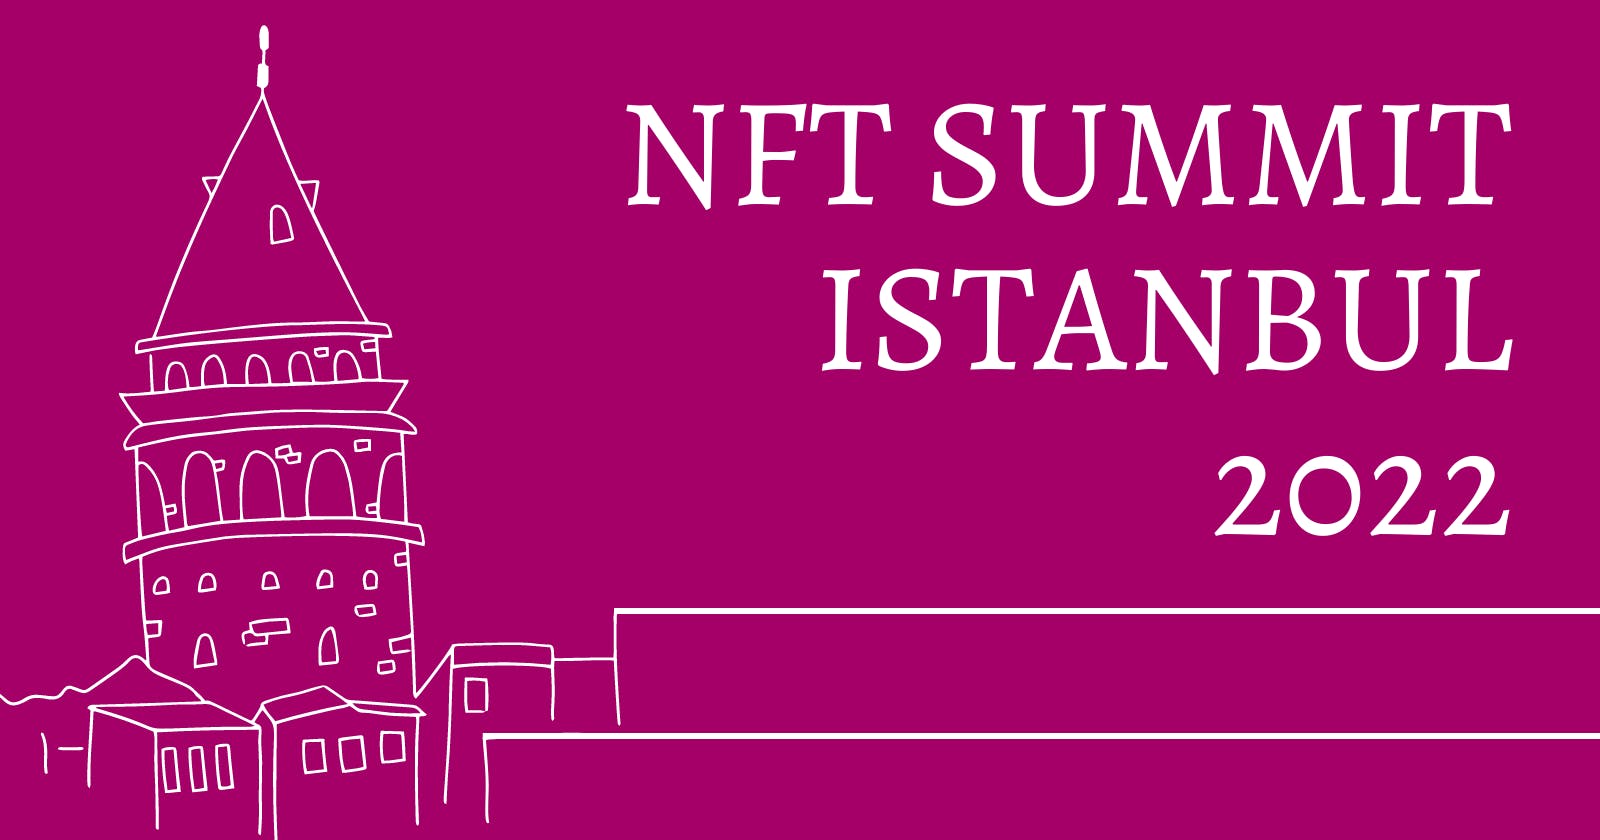 The very first edition of the NFT Summit Istanbul